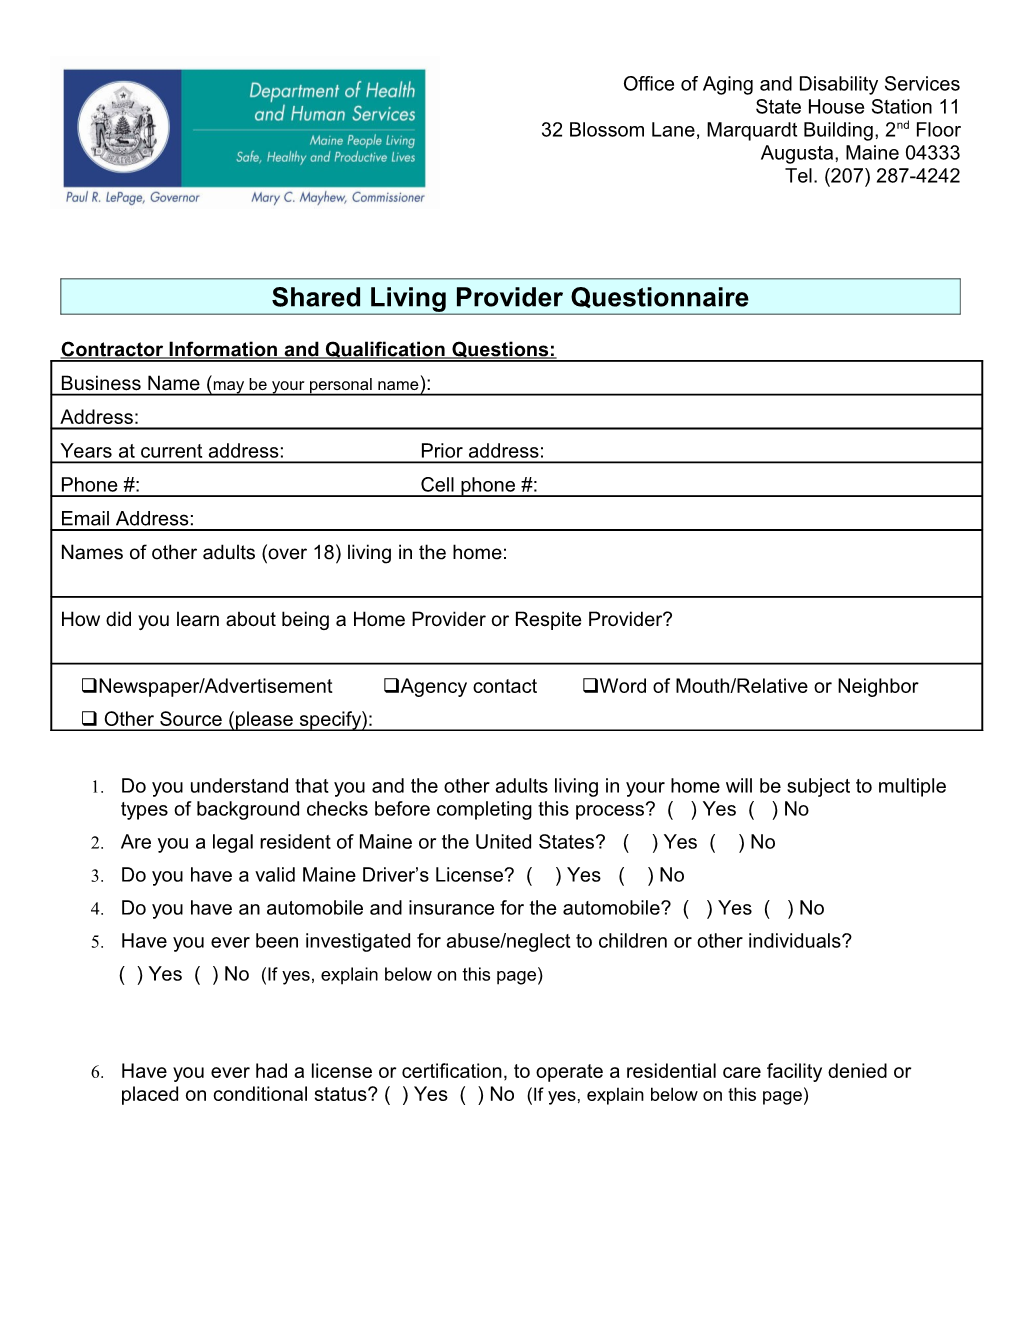 Shared Living Provider Questionnaire